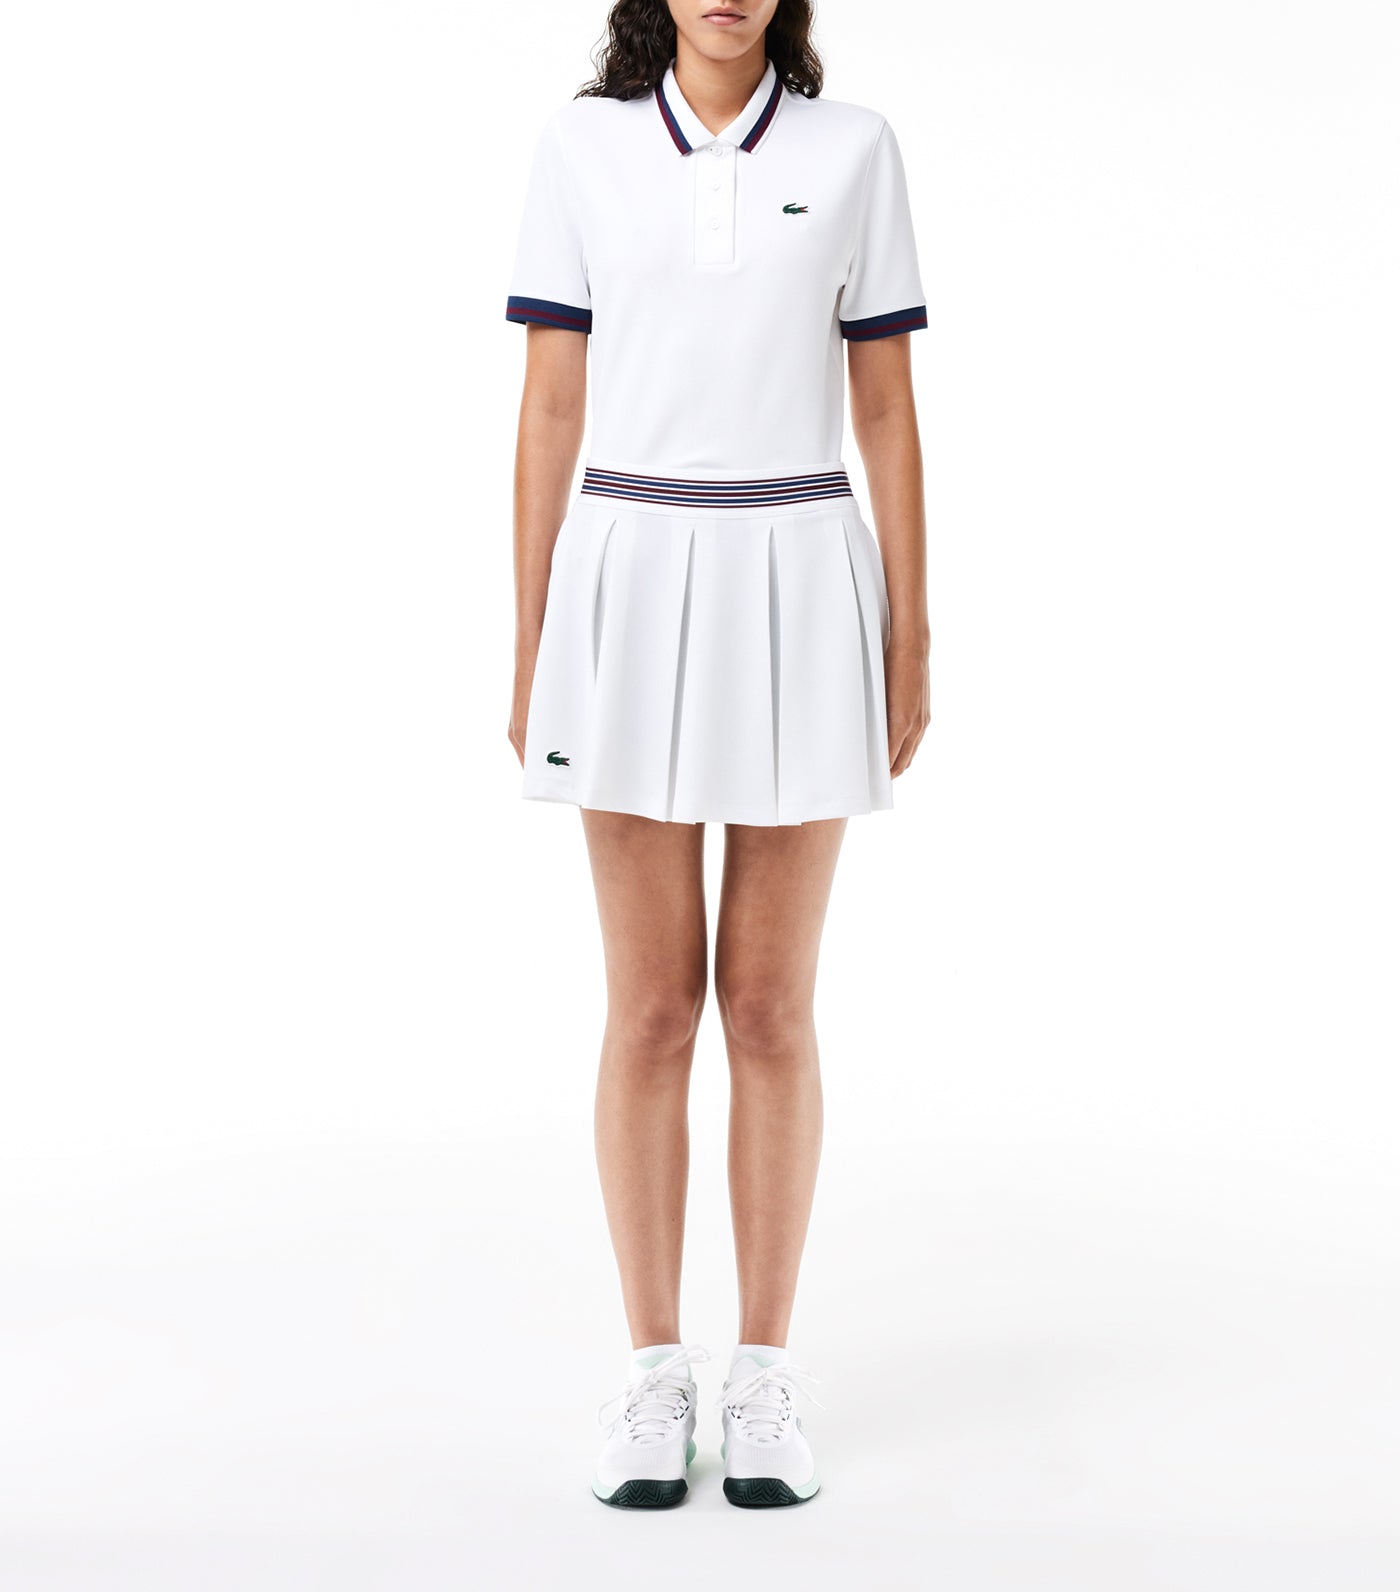 Piqué Tennis Skirt with Integrated Shorts White